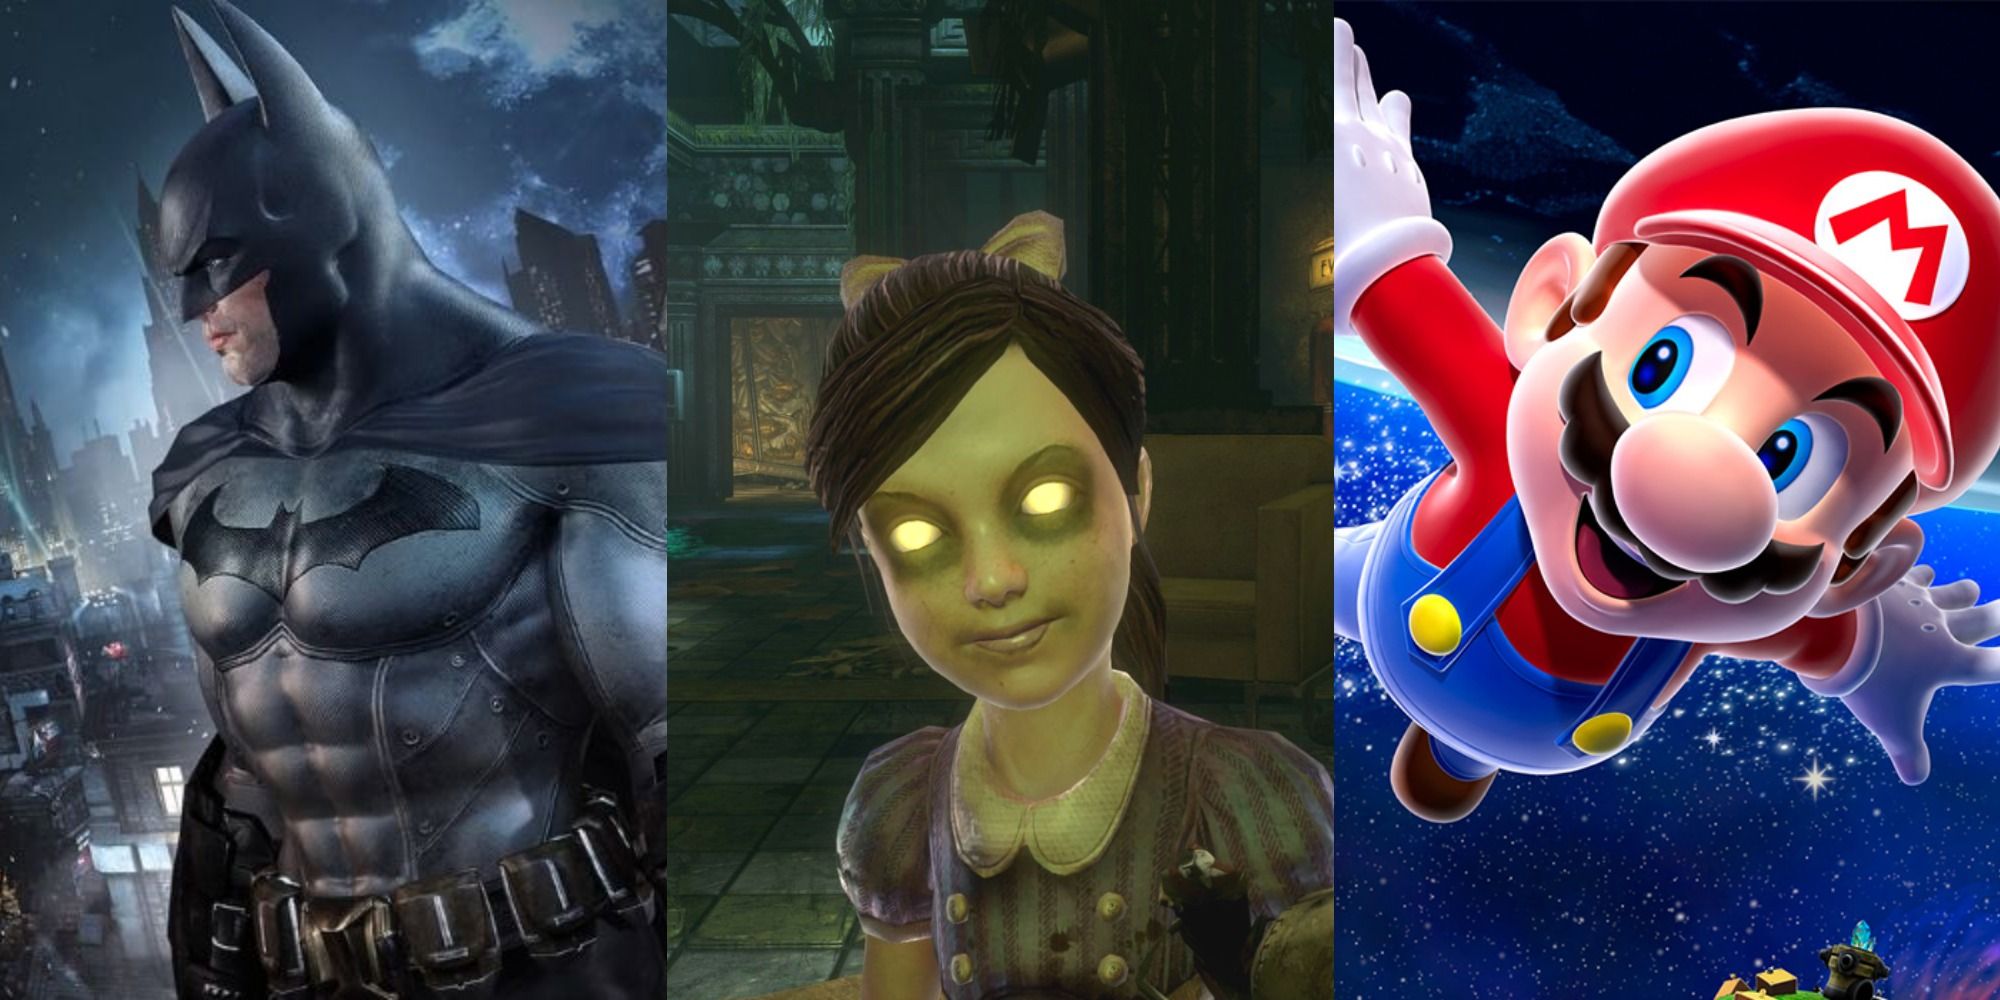 Batman from Arkham City, a little girl with glowing eyes from BioShock and Mario from Super Mario Galaxy in a collage